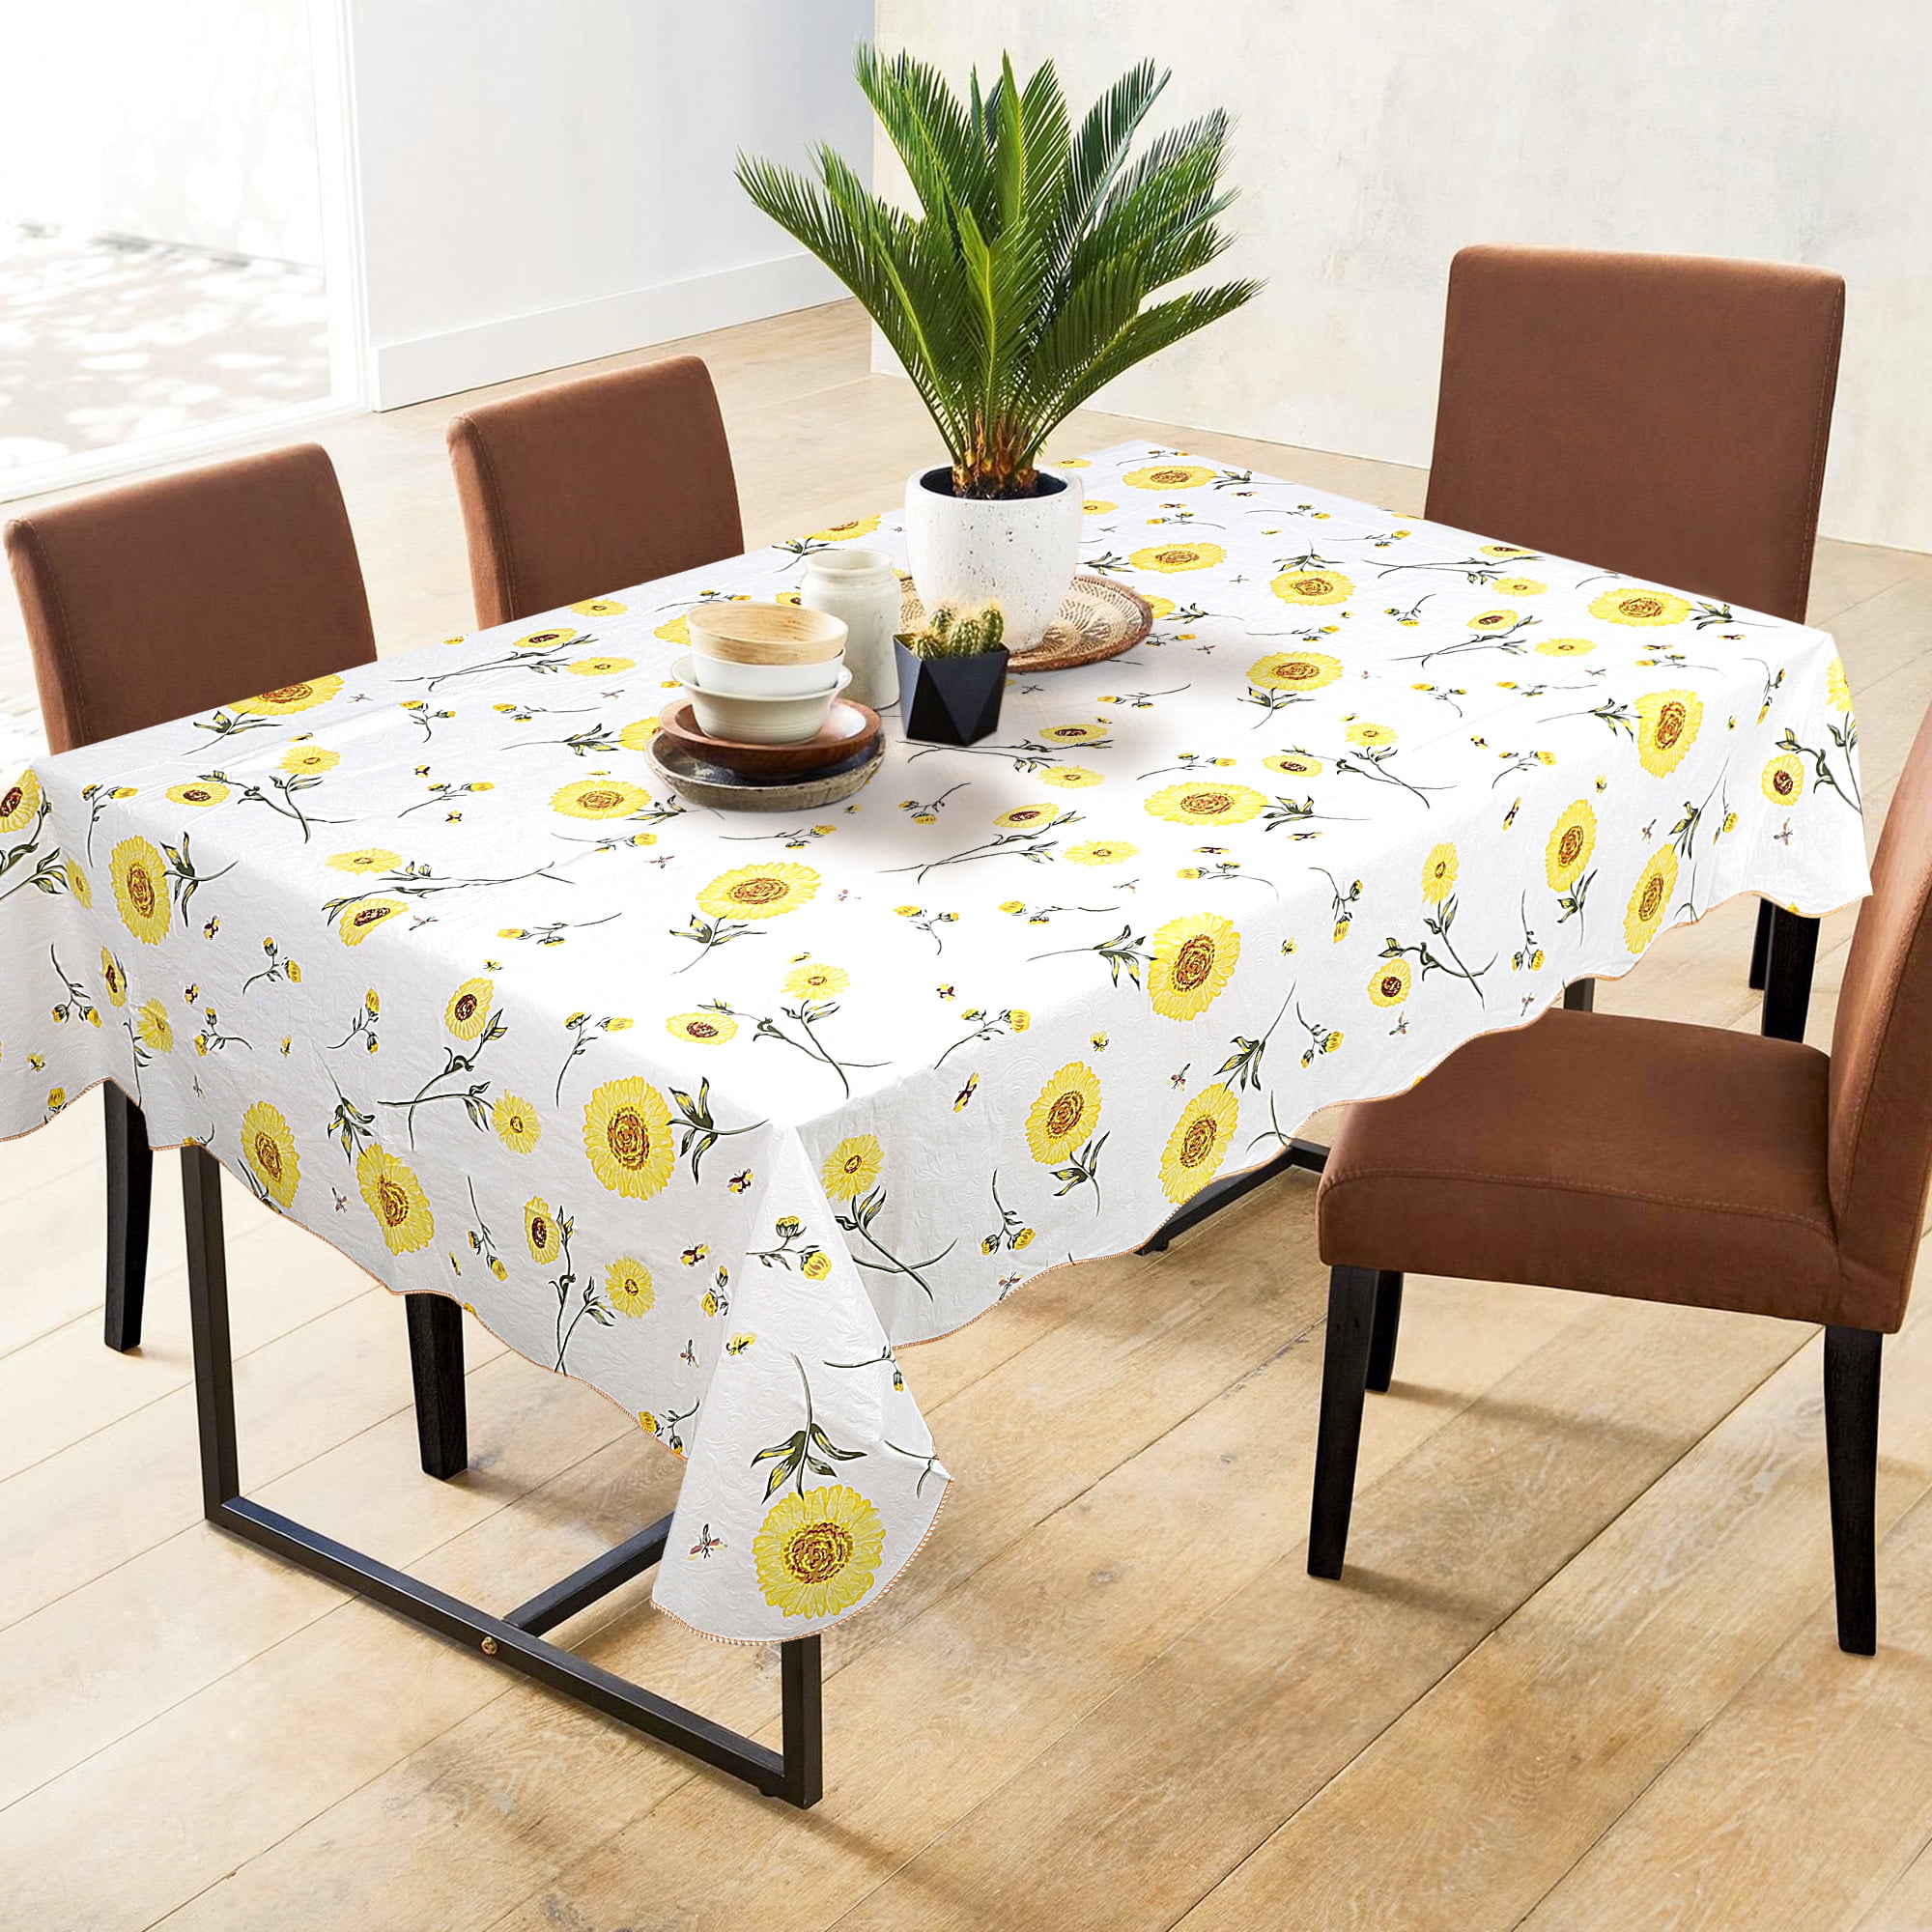 Details about   Large Luxury Fabric Tablecloth Blue Floral Print 60x84 Rectangular Home Decor 